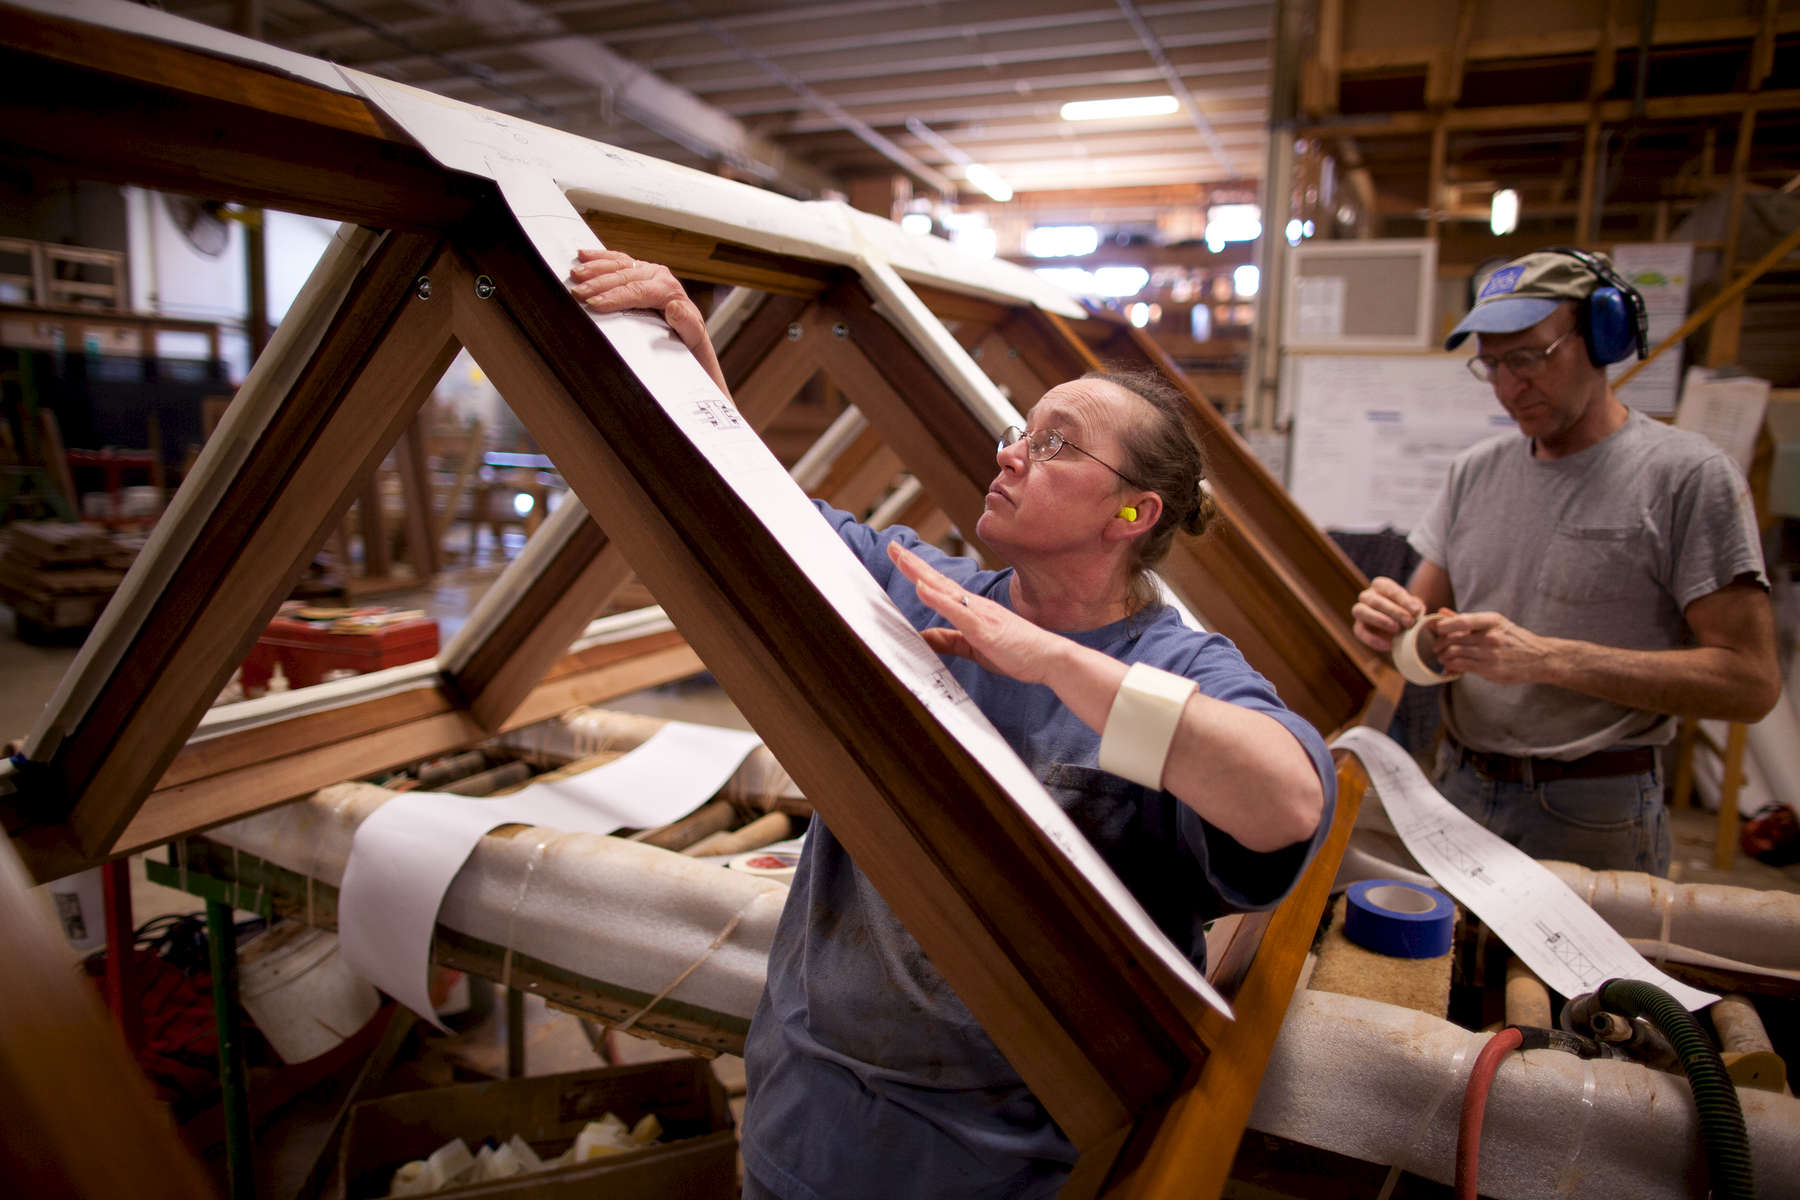 Workers at Duratherm Window Corporation in Vassalboro, ME. Duratherm is one of the leading makers of wooden architectural windows in the world.